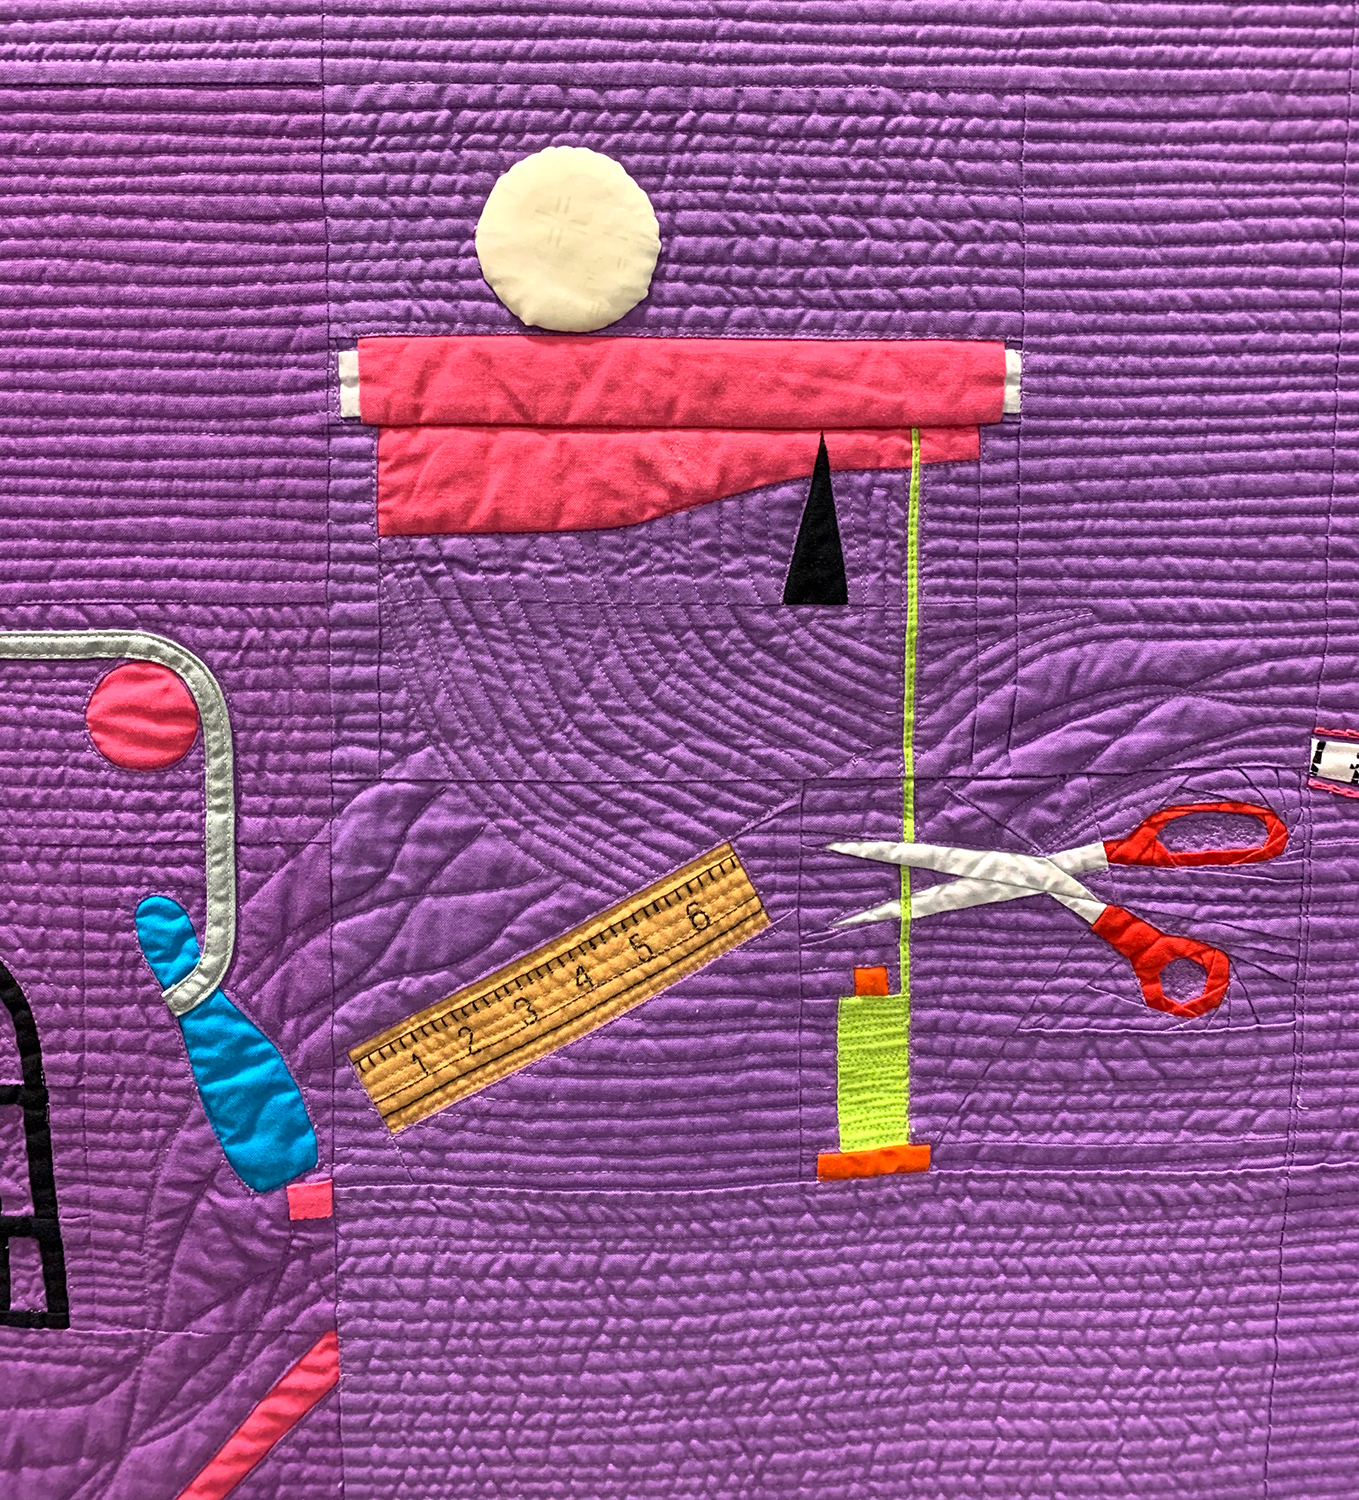 detail of a modern quilt that looks like a Rube Goldberg contraption